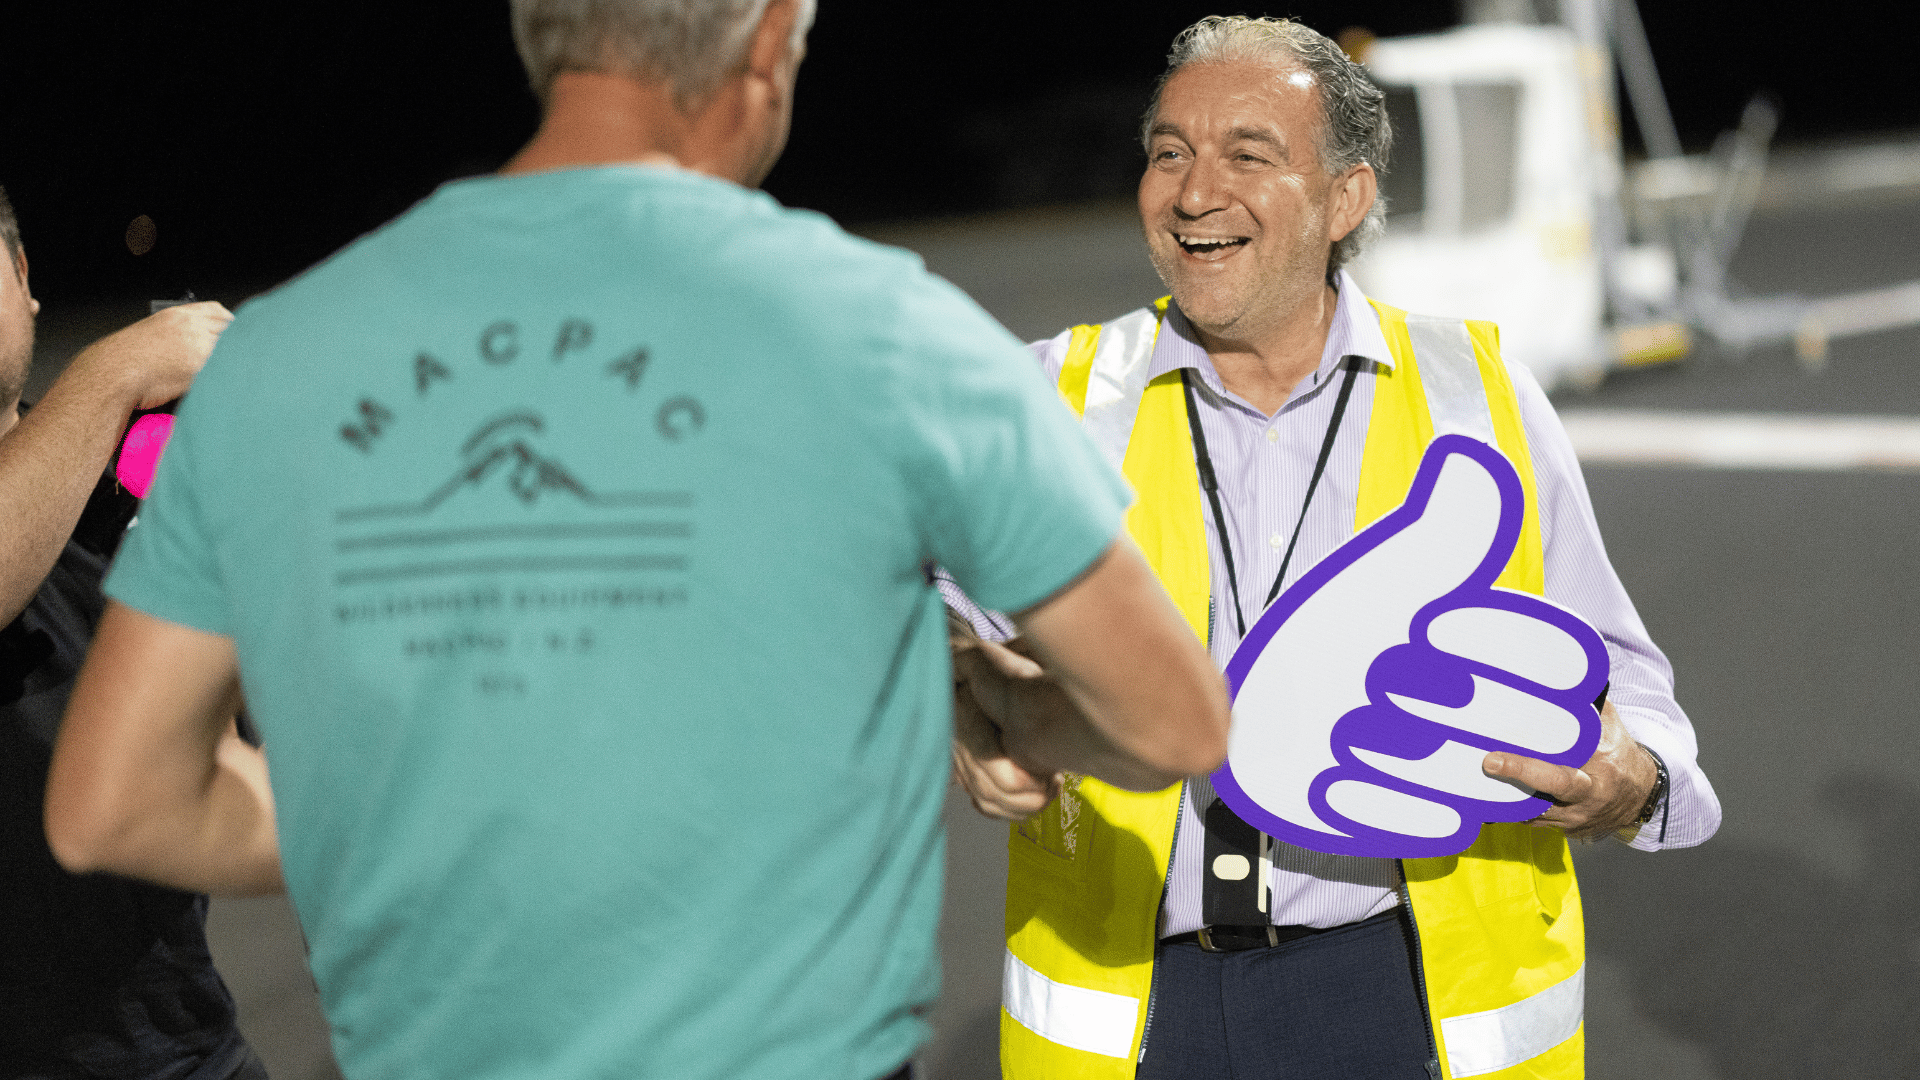 Coffs Harbour Airport General Manager Frank Mondello shaking hands with passenger.